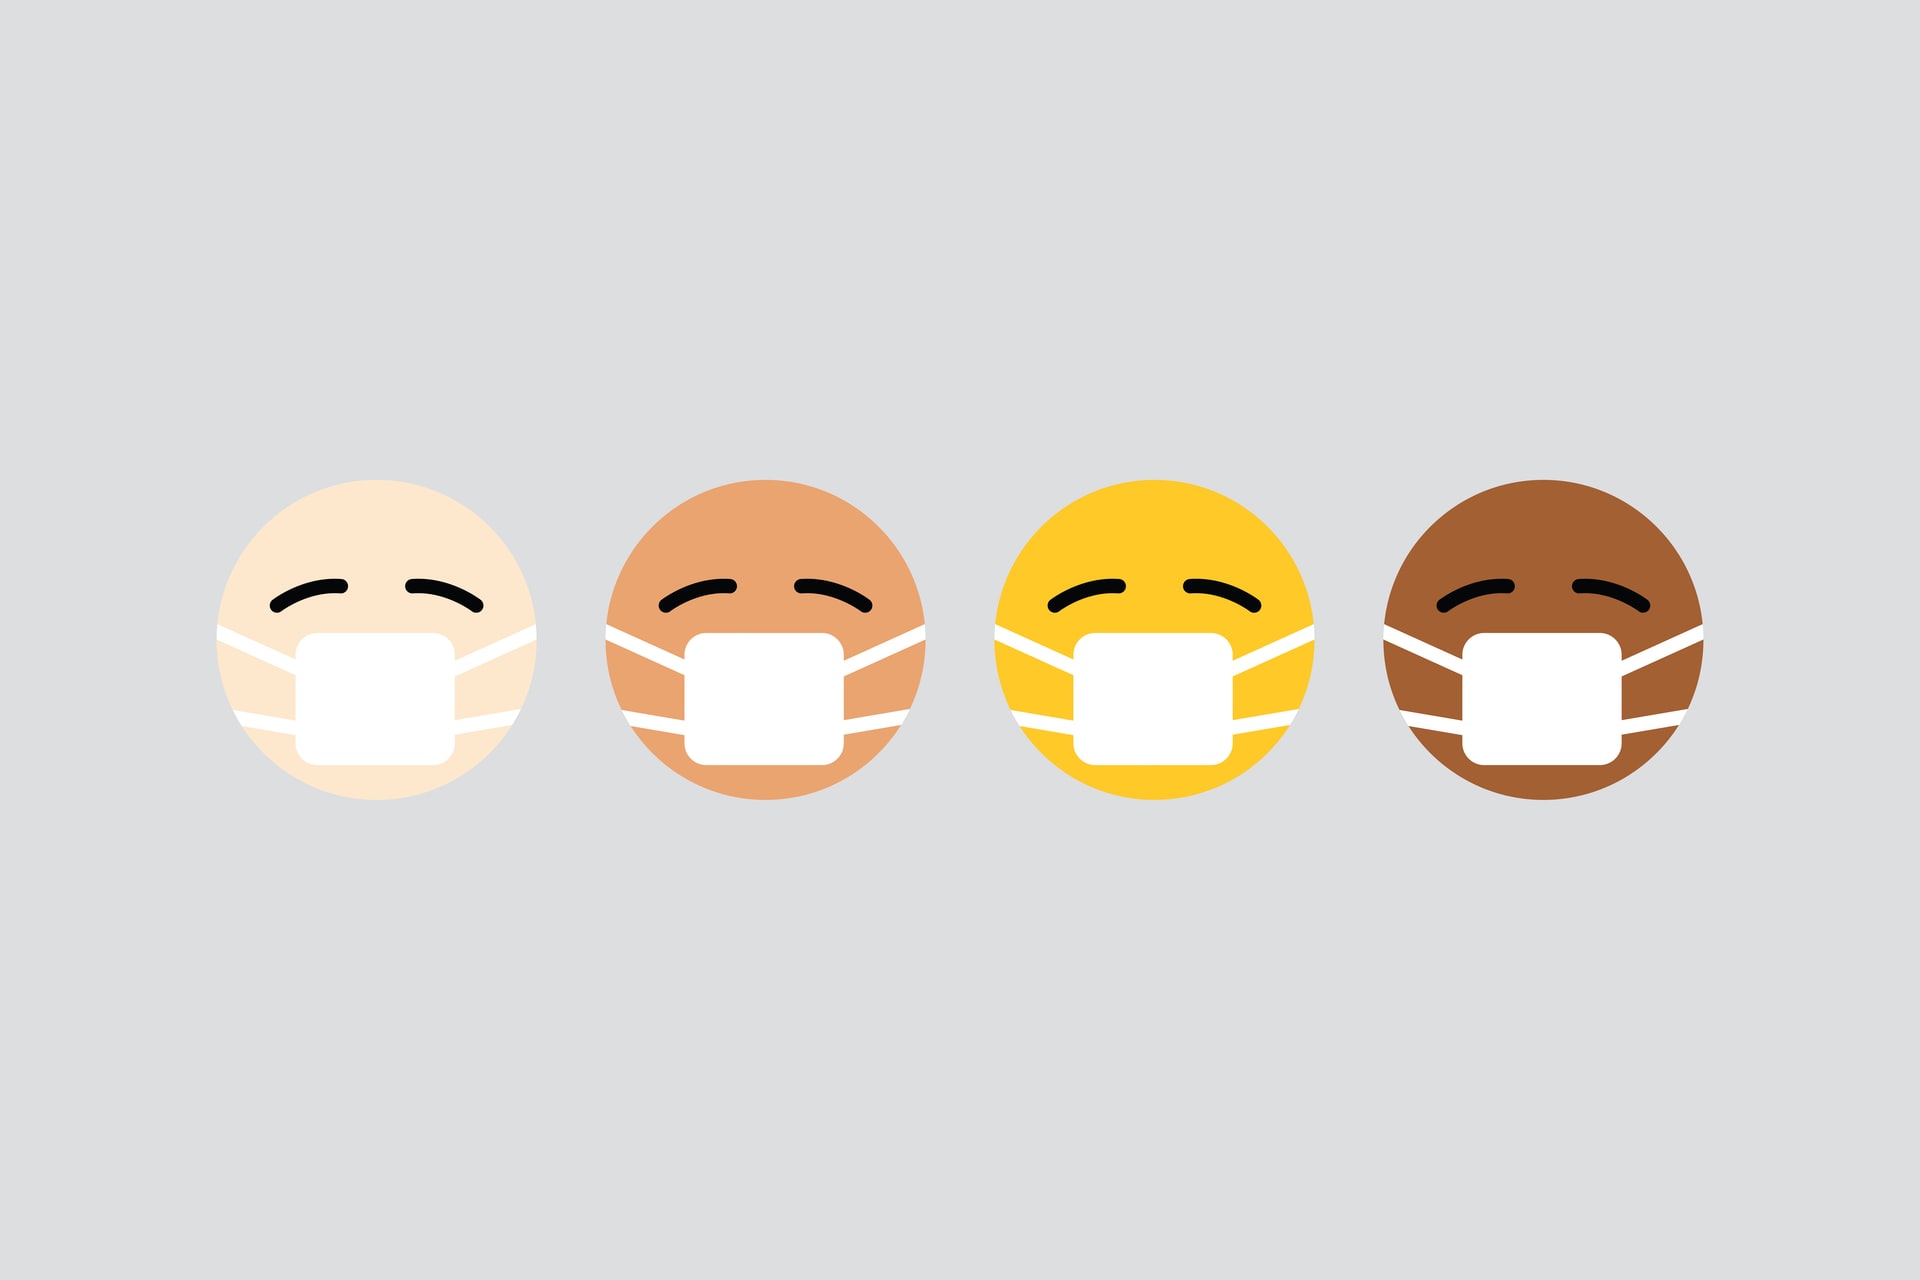 Four emojis of different skin tones wearing face masks, representing the risks of returning to work during COVID-19